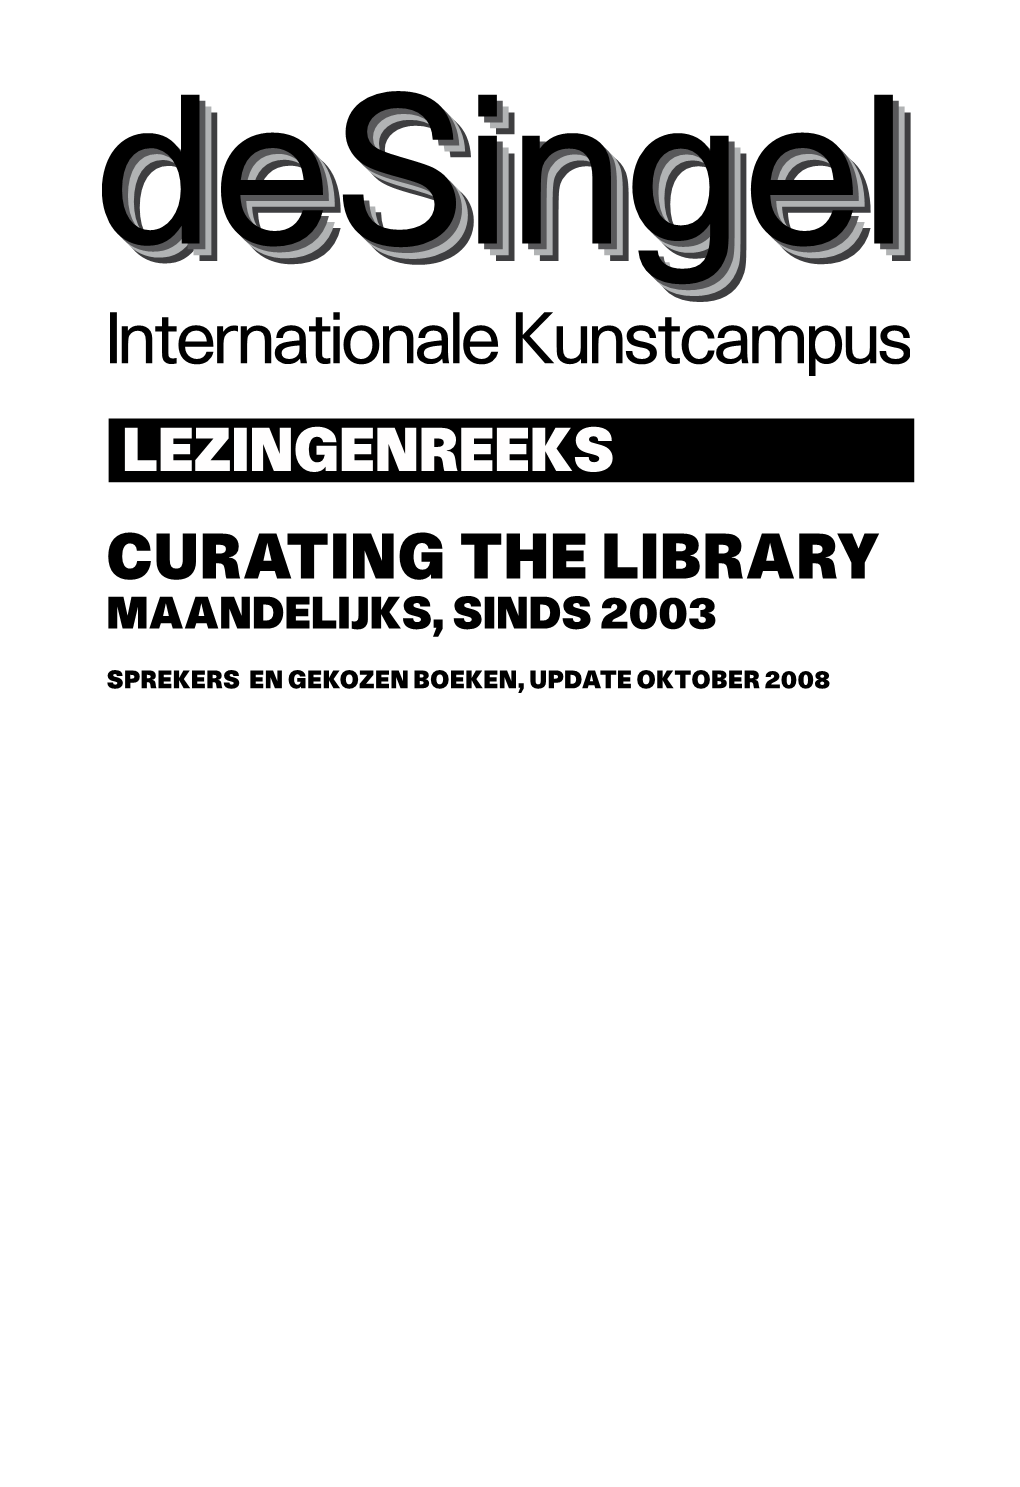 Curating the Library